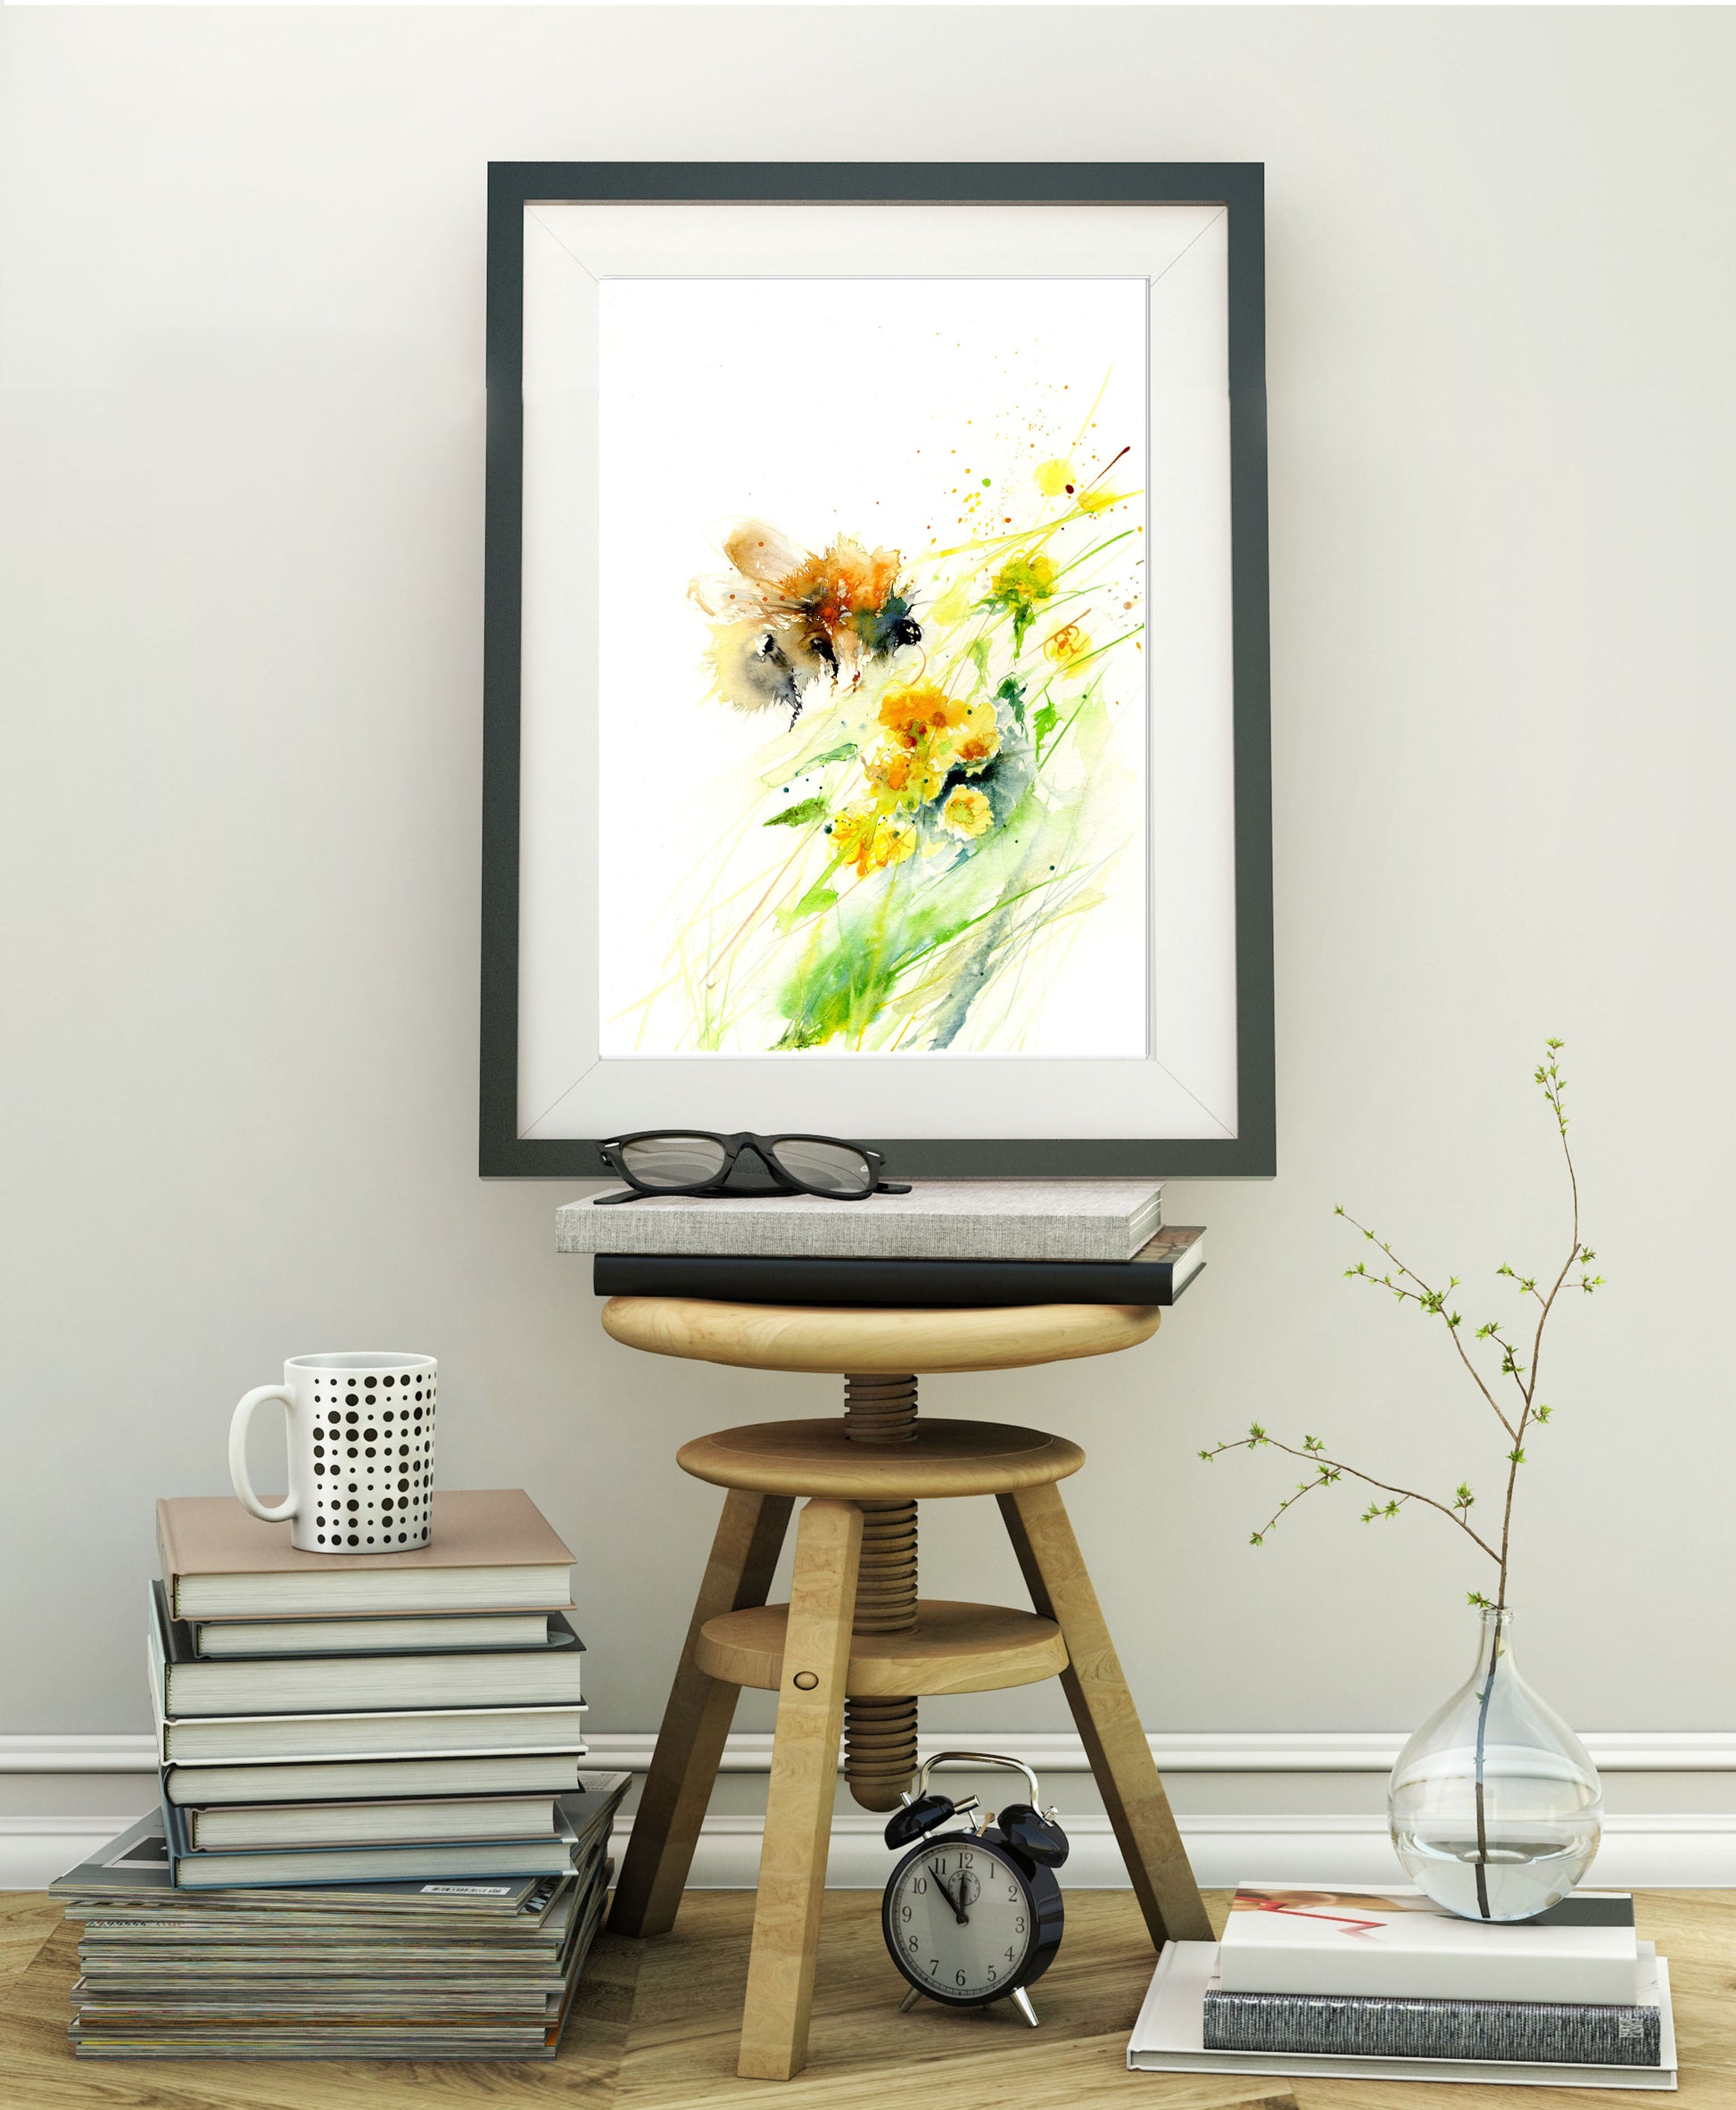 LIMITED EDITON PRINT ' Bumble bee on a yellow Kerria flower' - Jen Buckley Art limited edition animal art prints